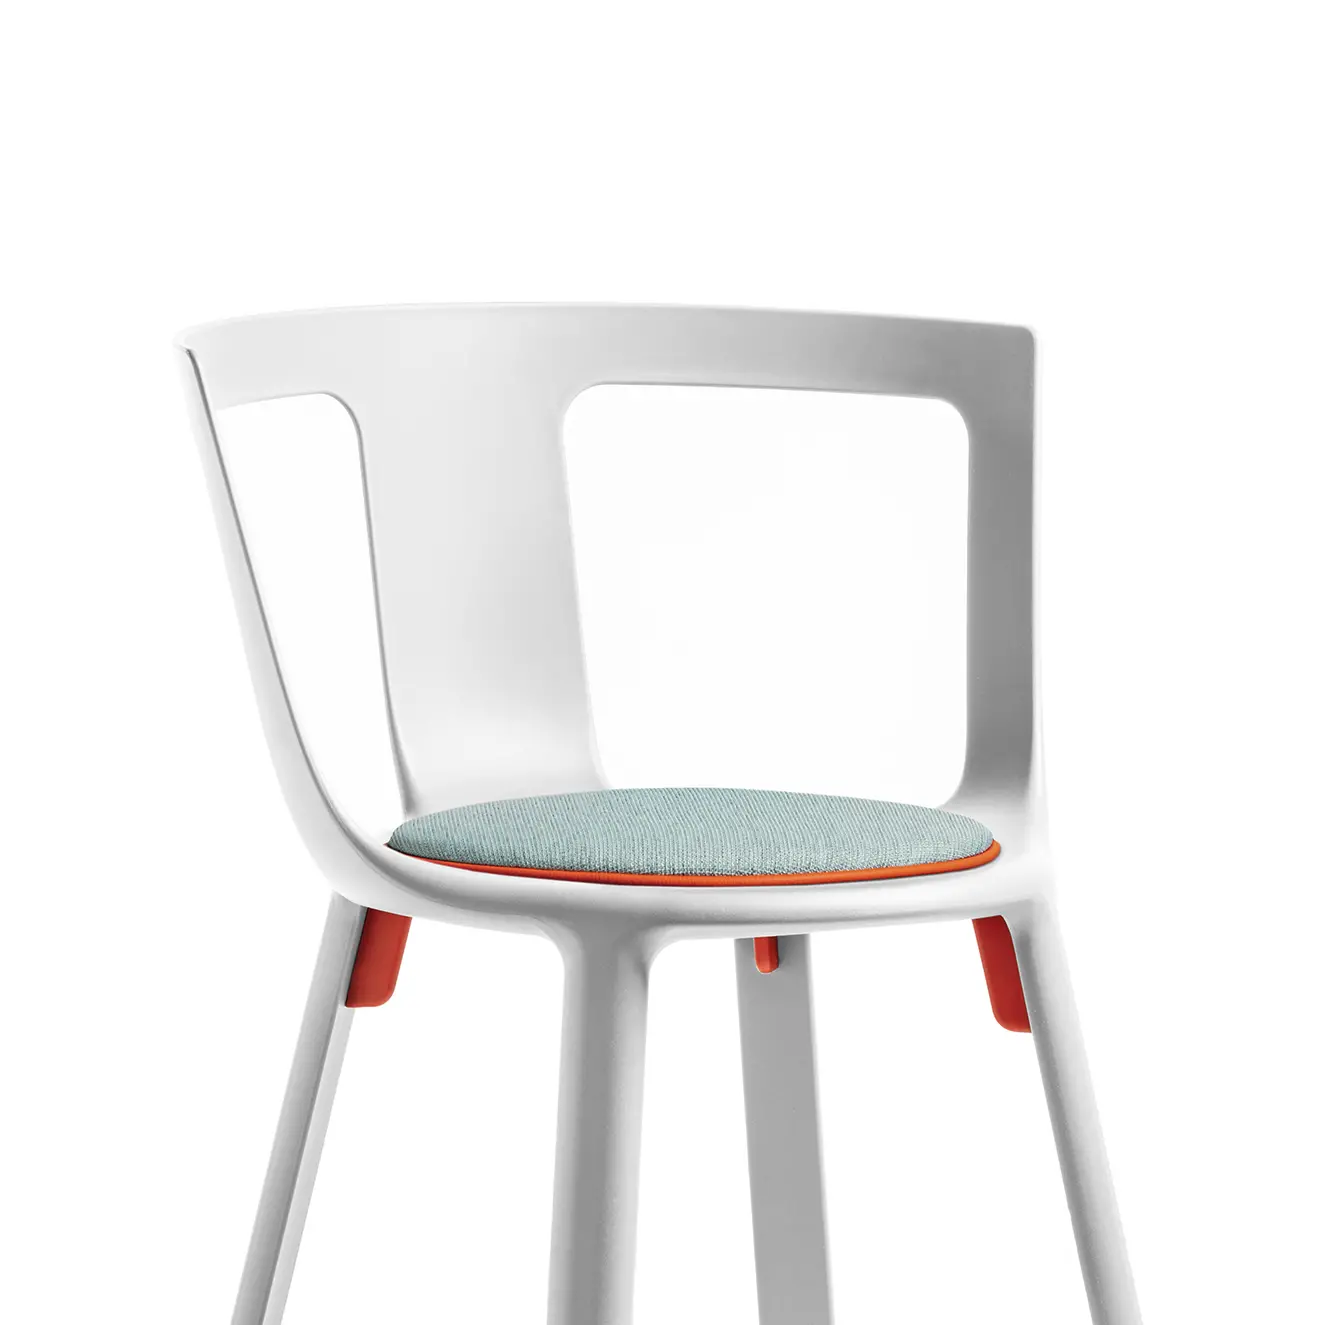 FLA chair by TOOU design